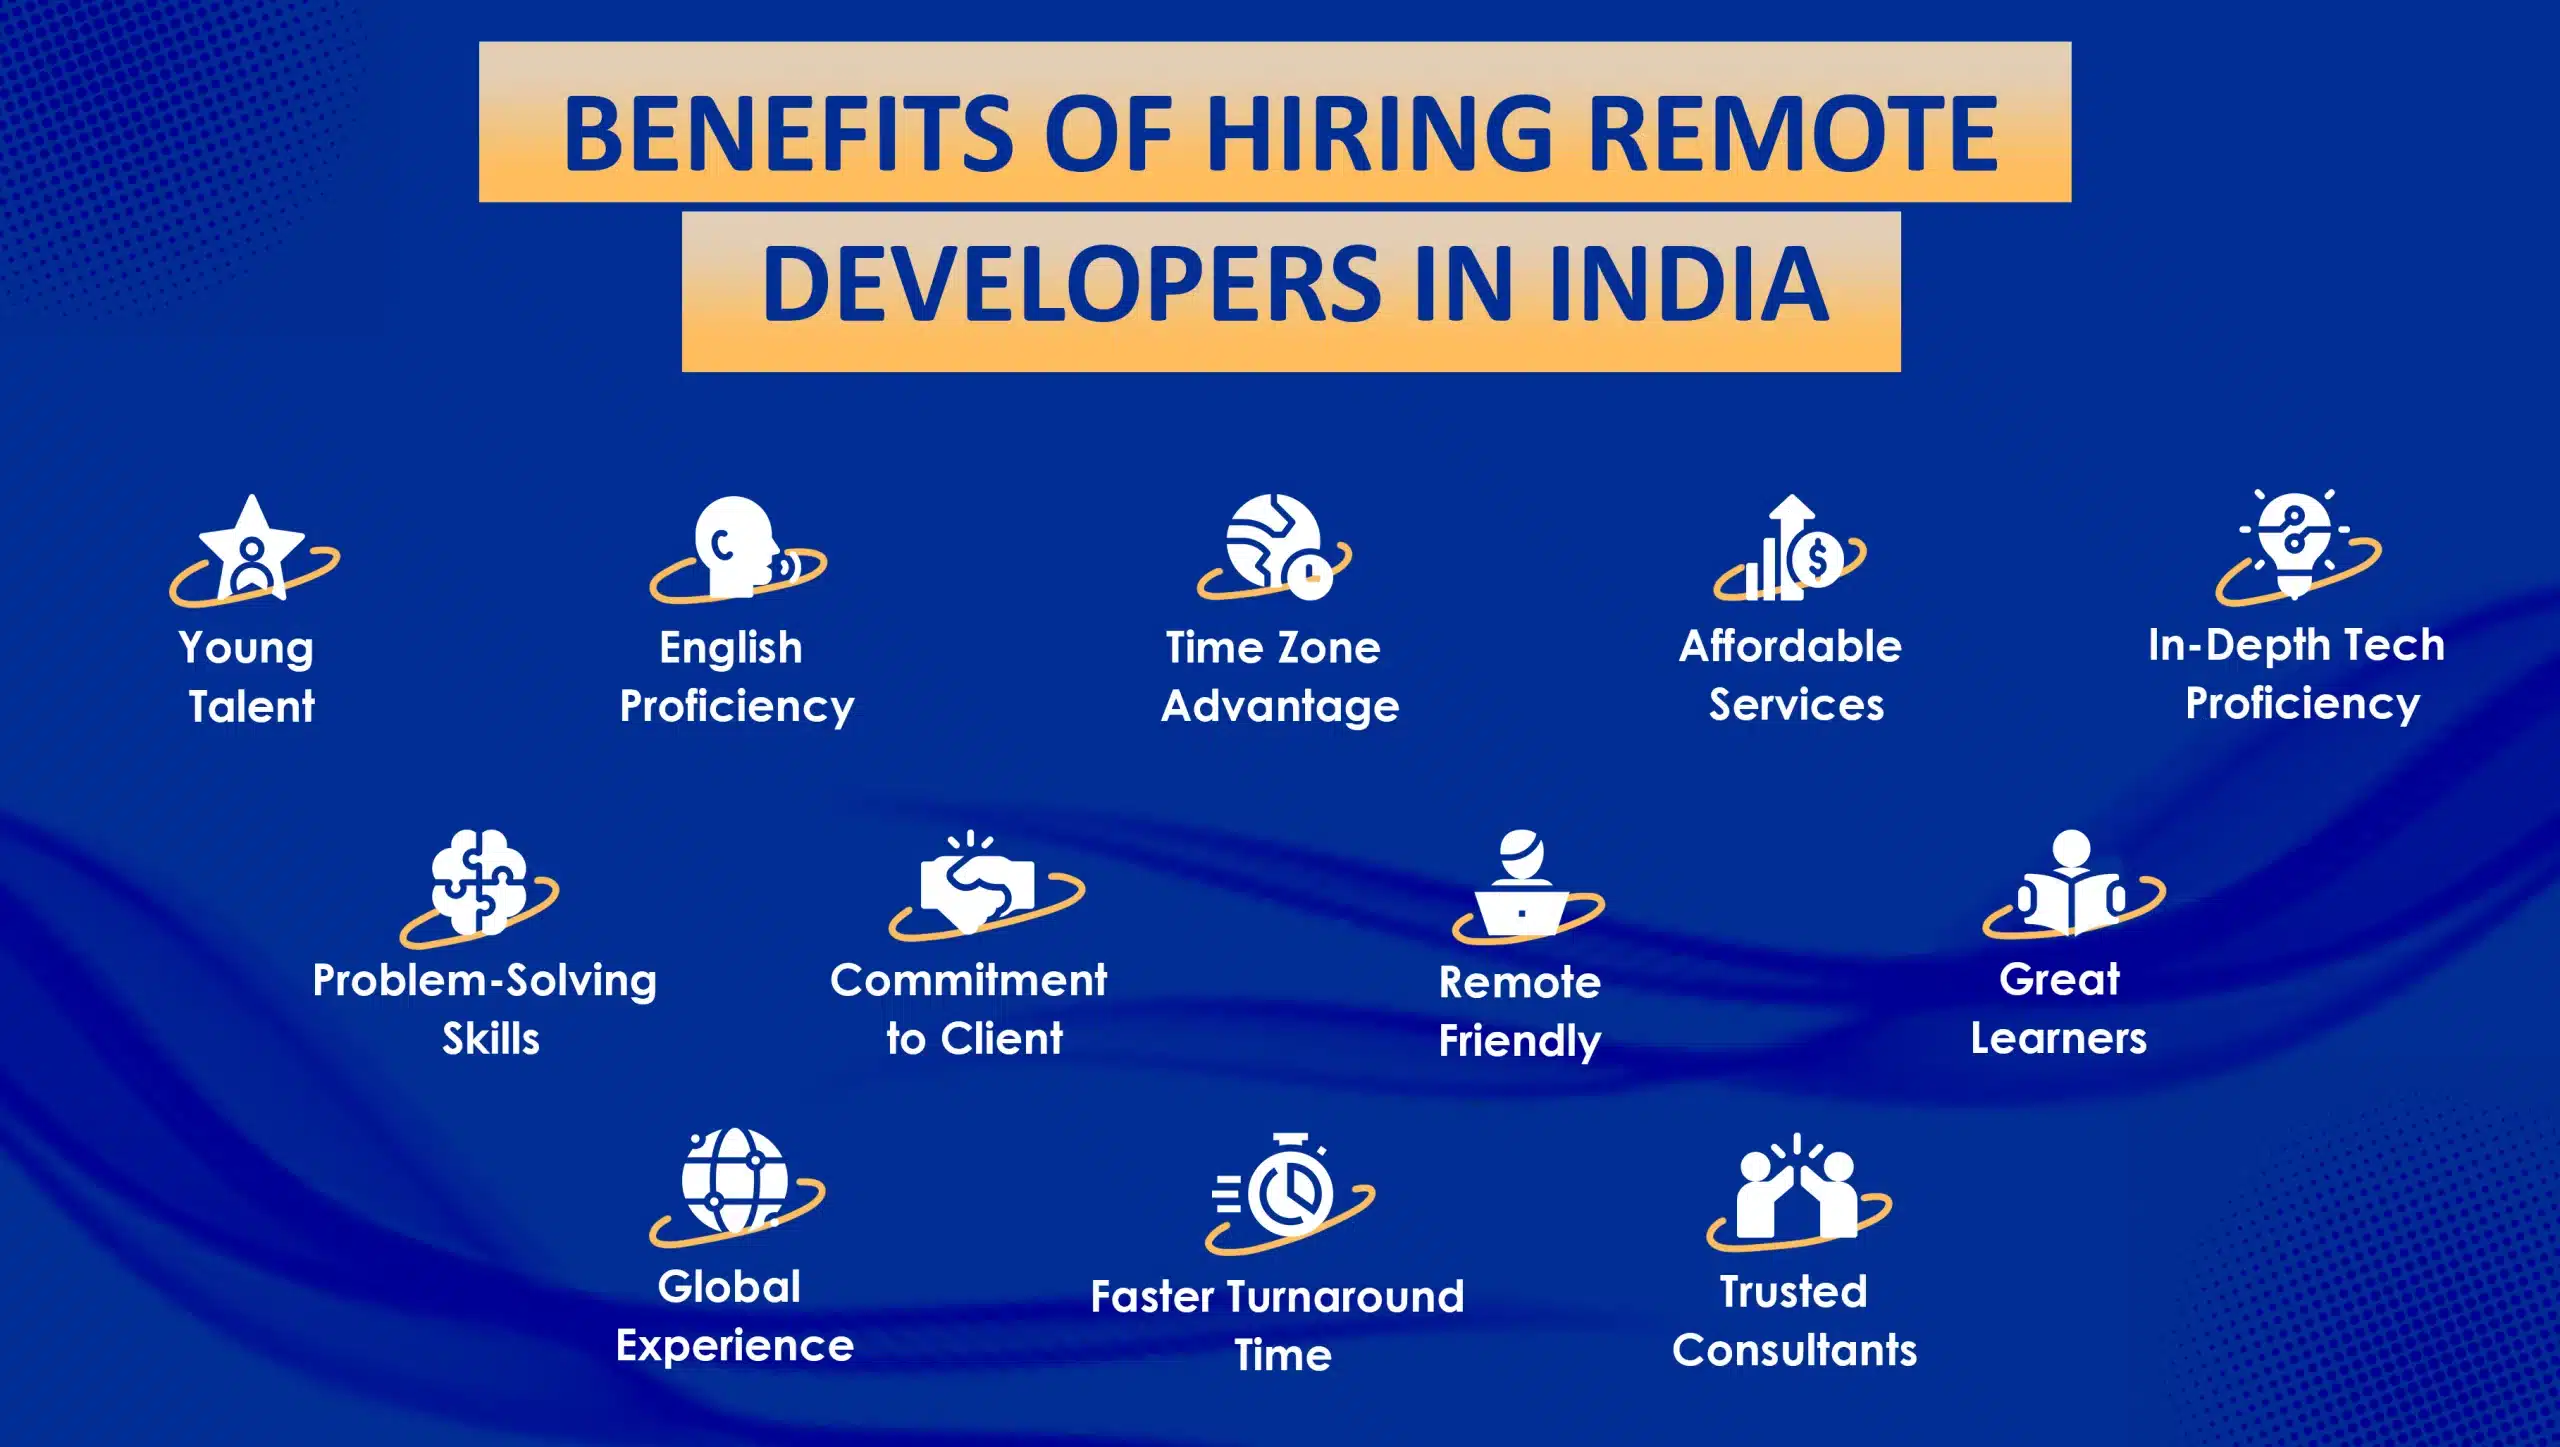 Benefits of hiring remote developers in India